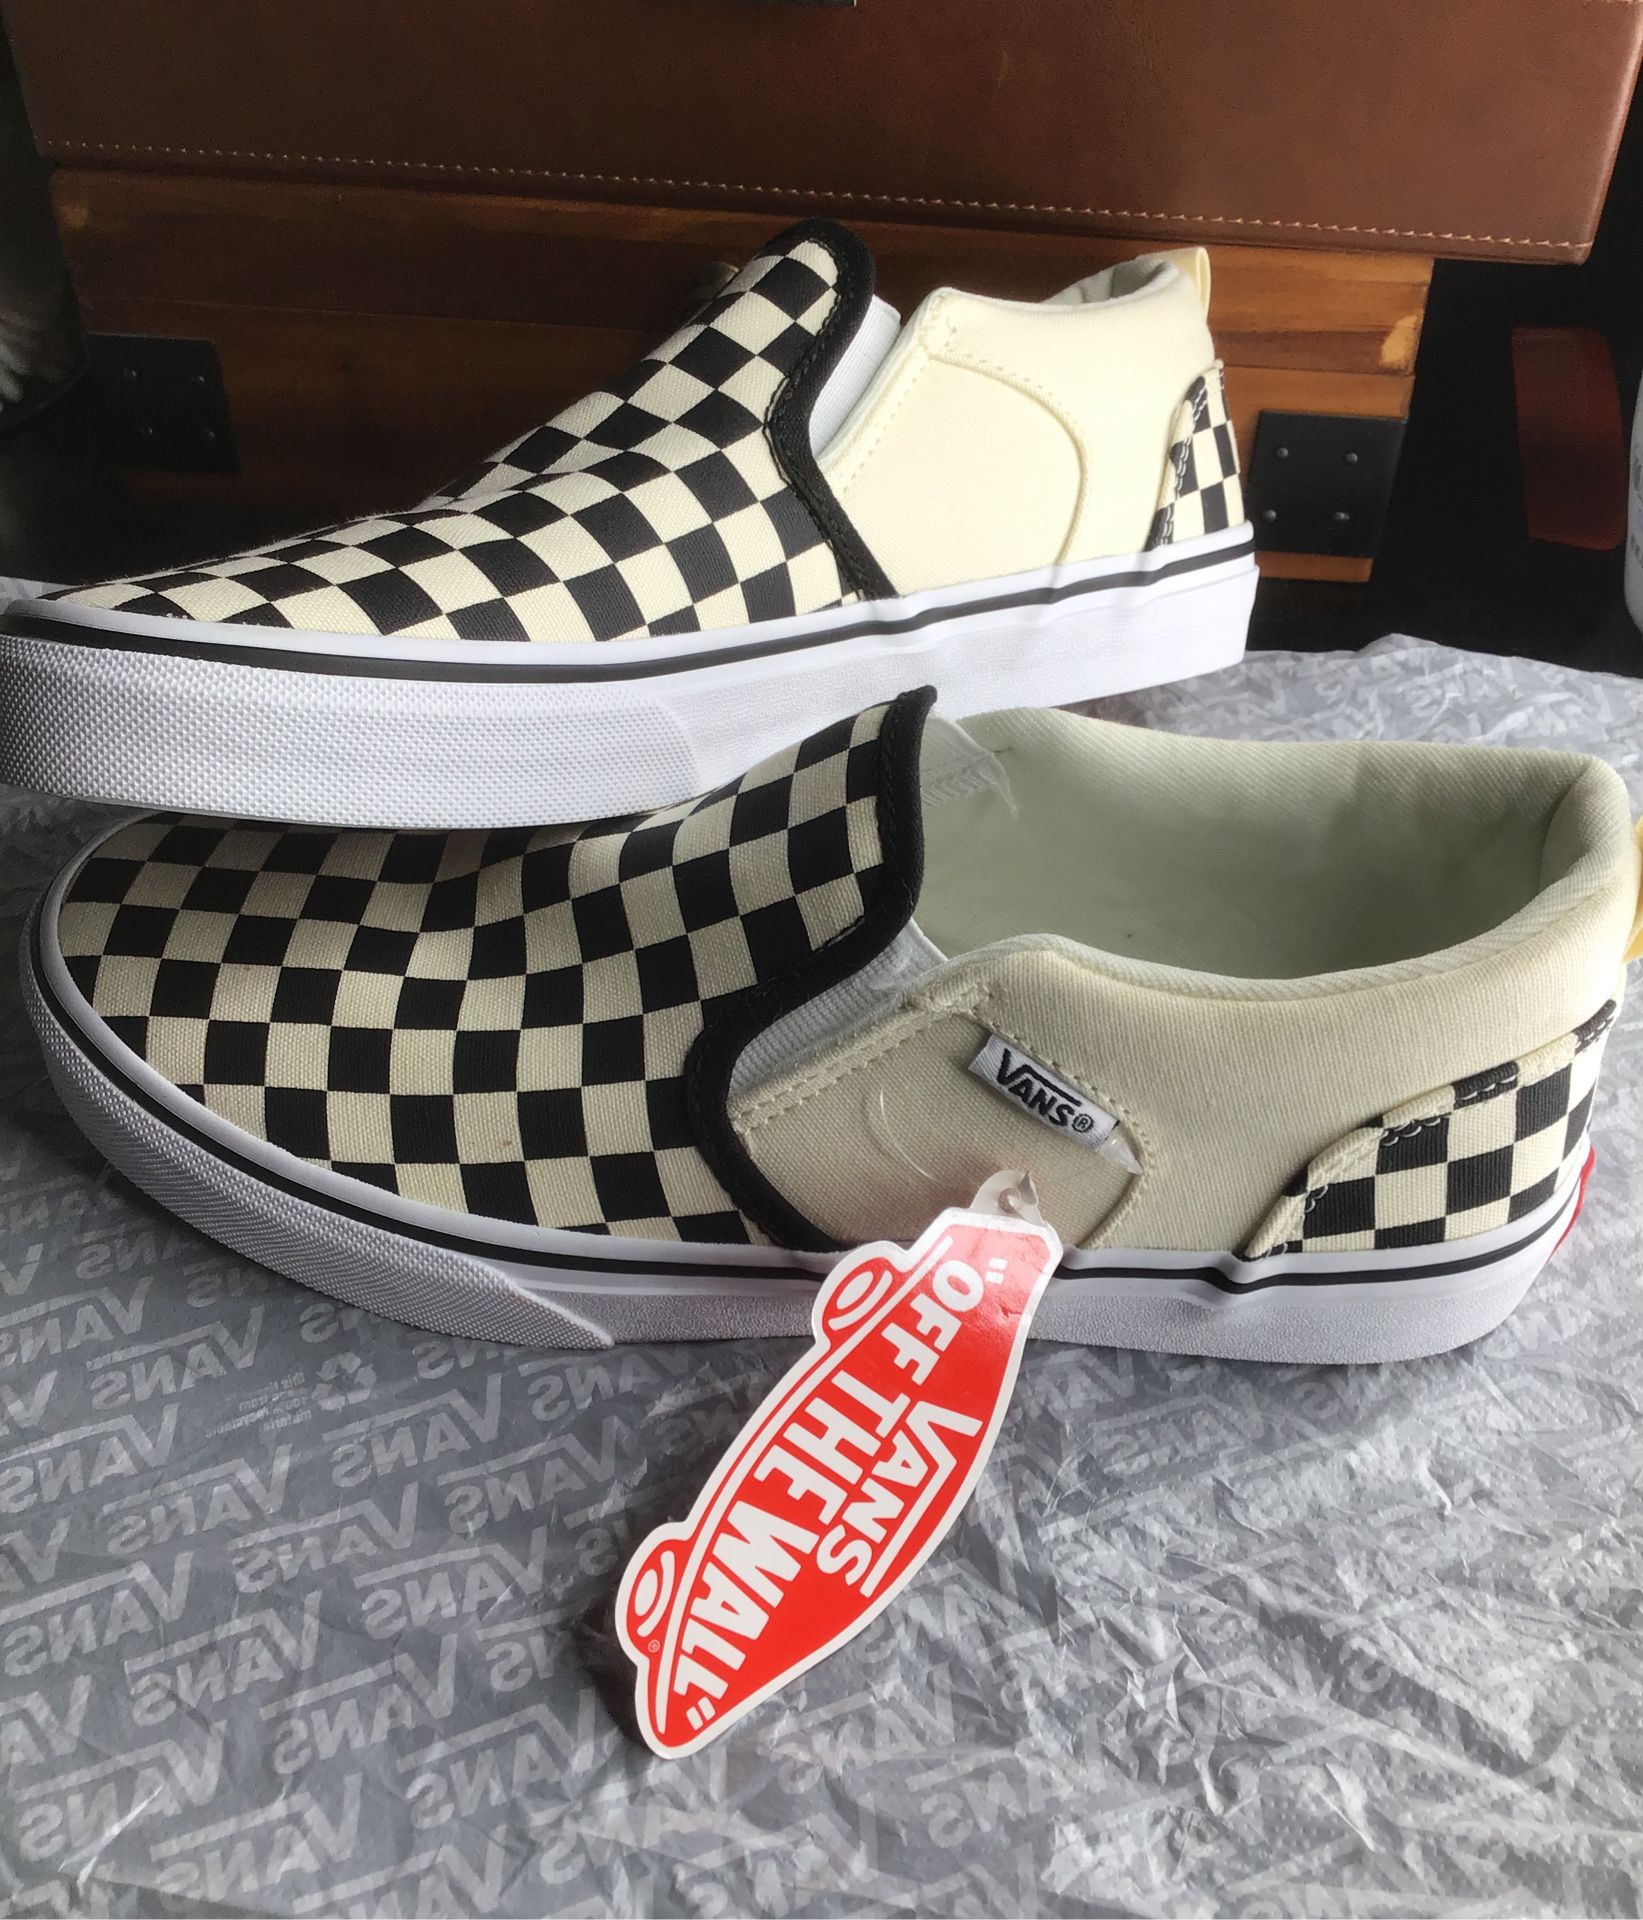 Checkered vans, brand new never worn, size:youth 5.0